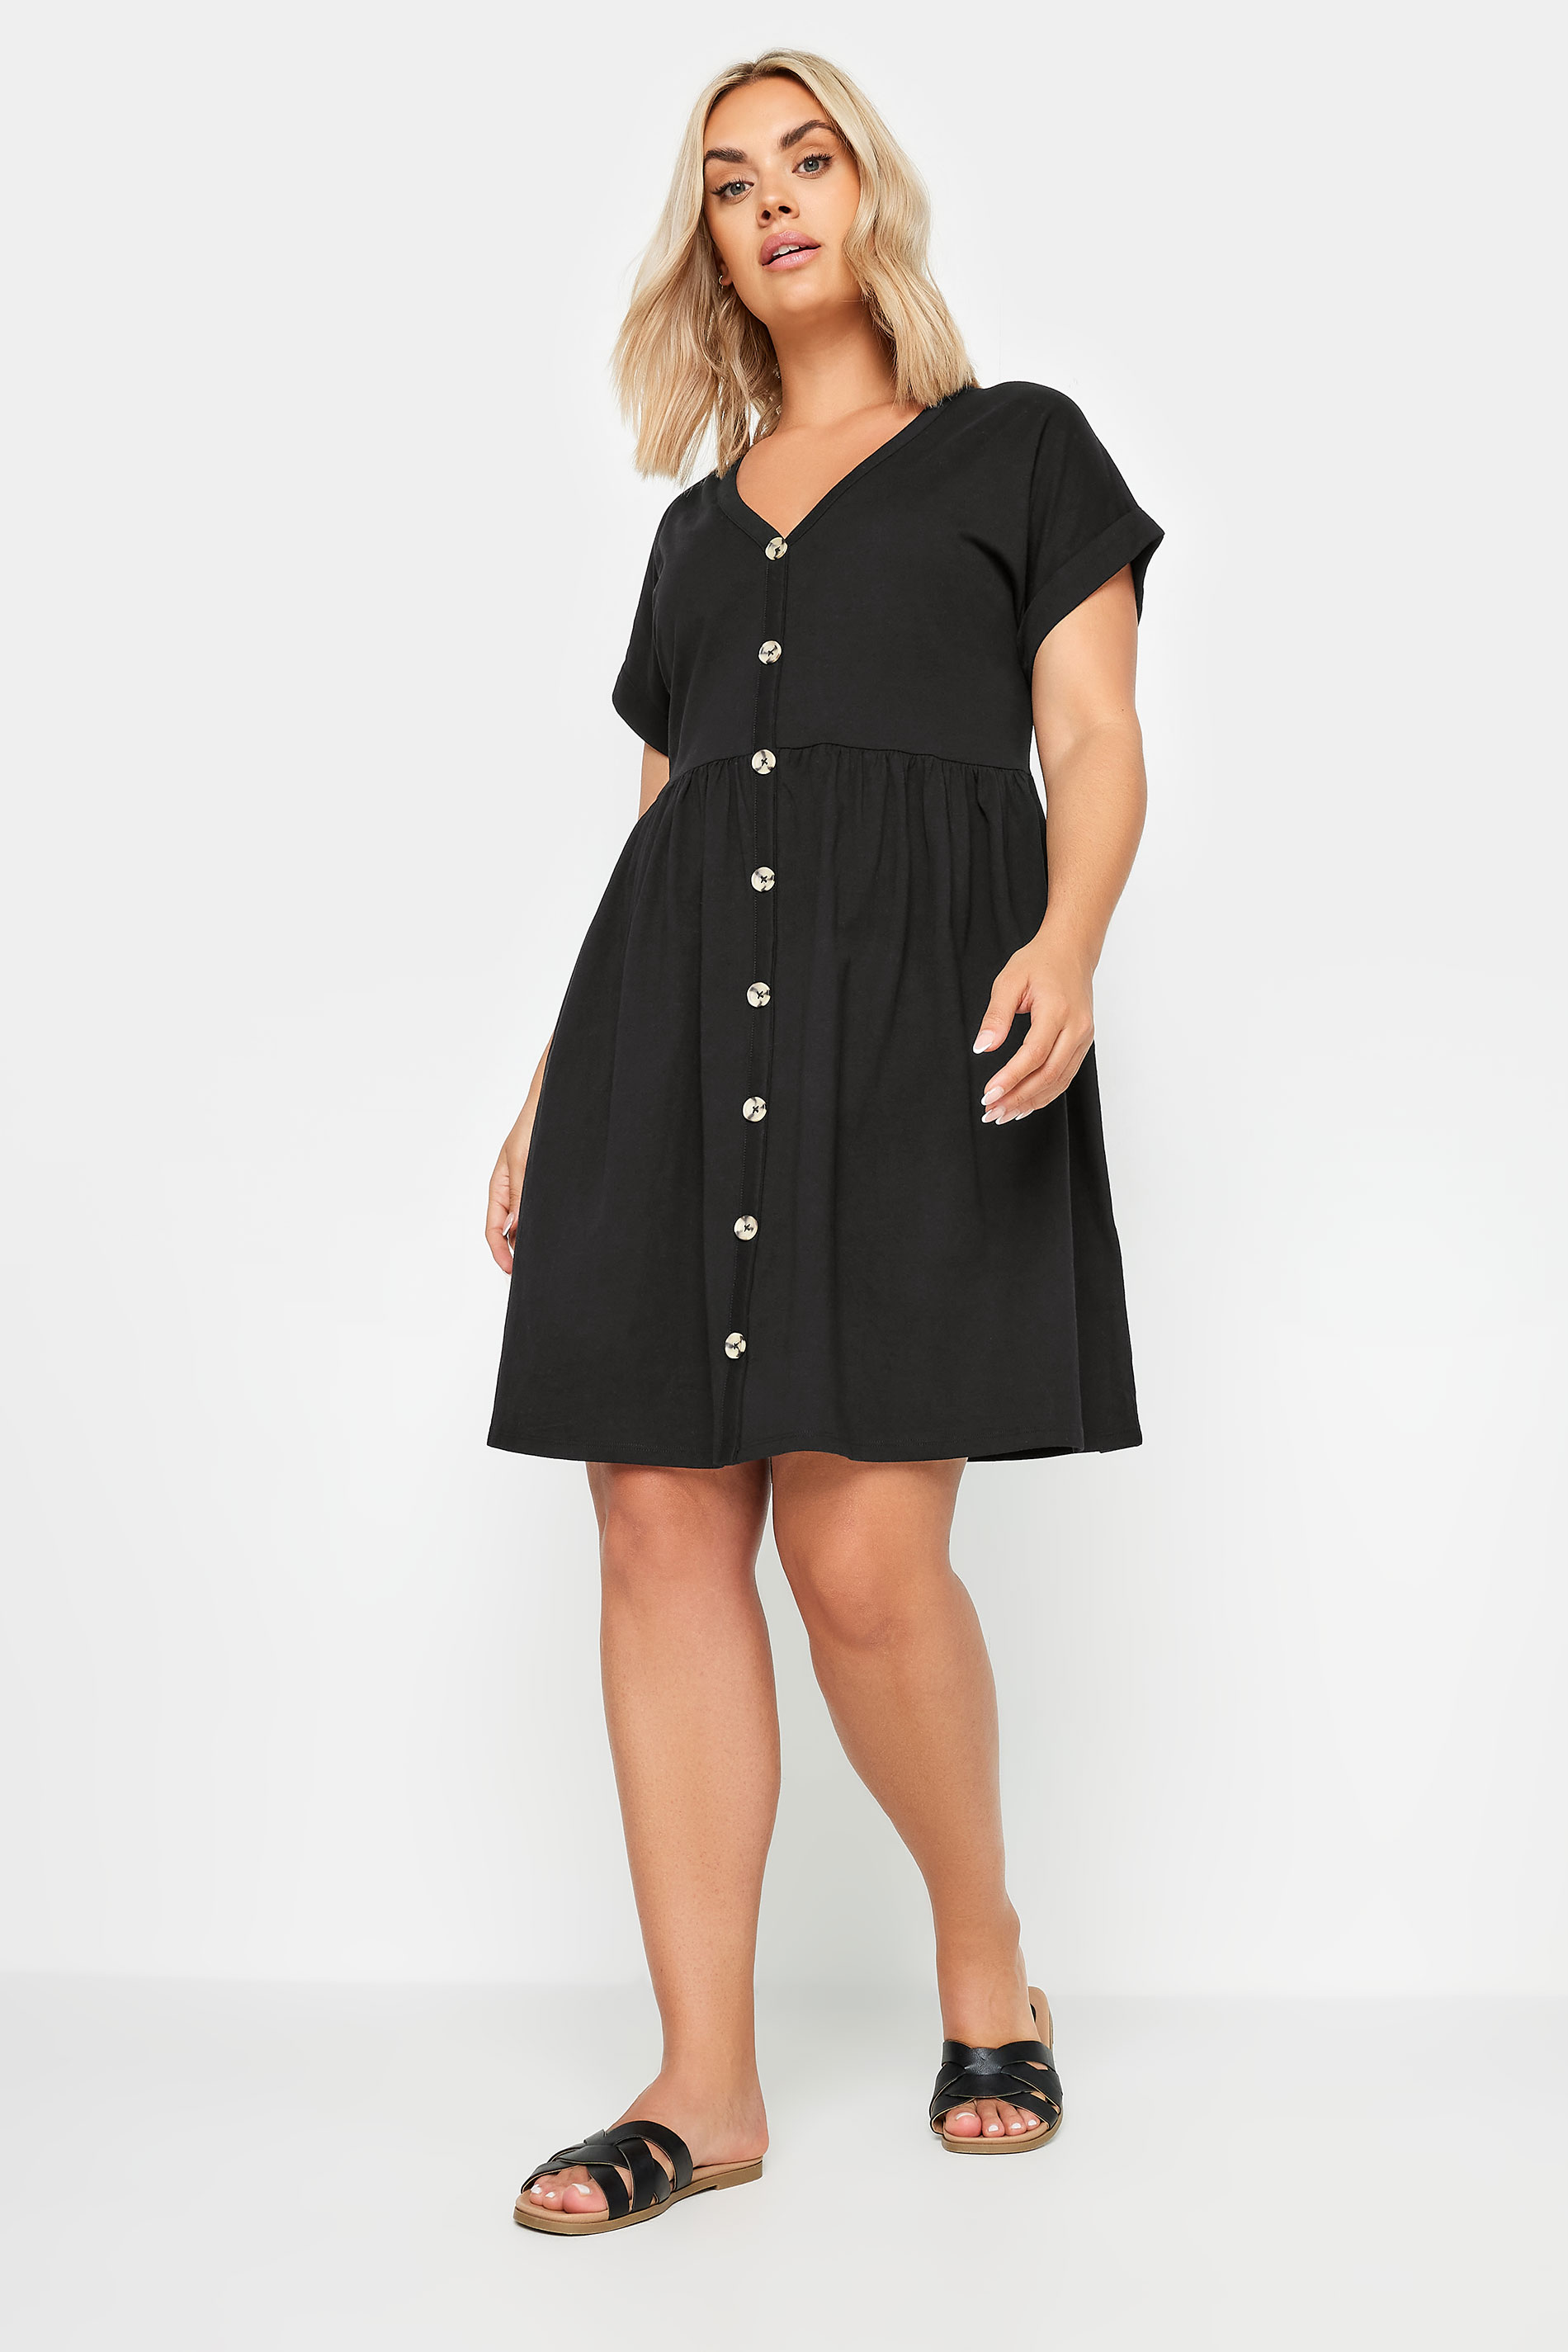 YOURS Plus Size Black Button Front Smock Dress | Yours Clothing 2